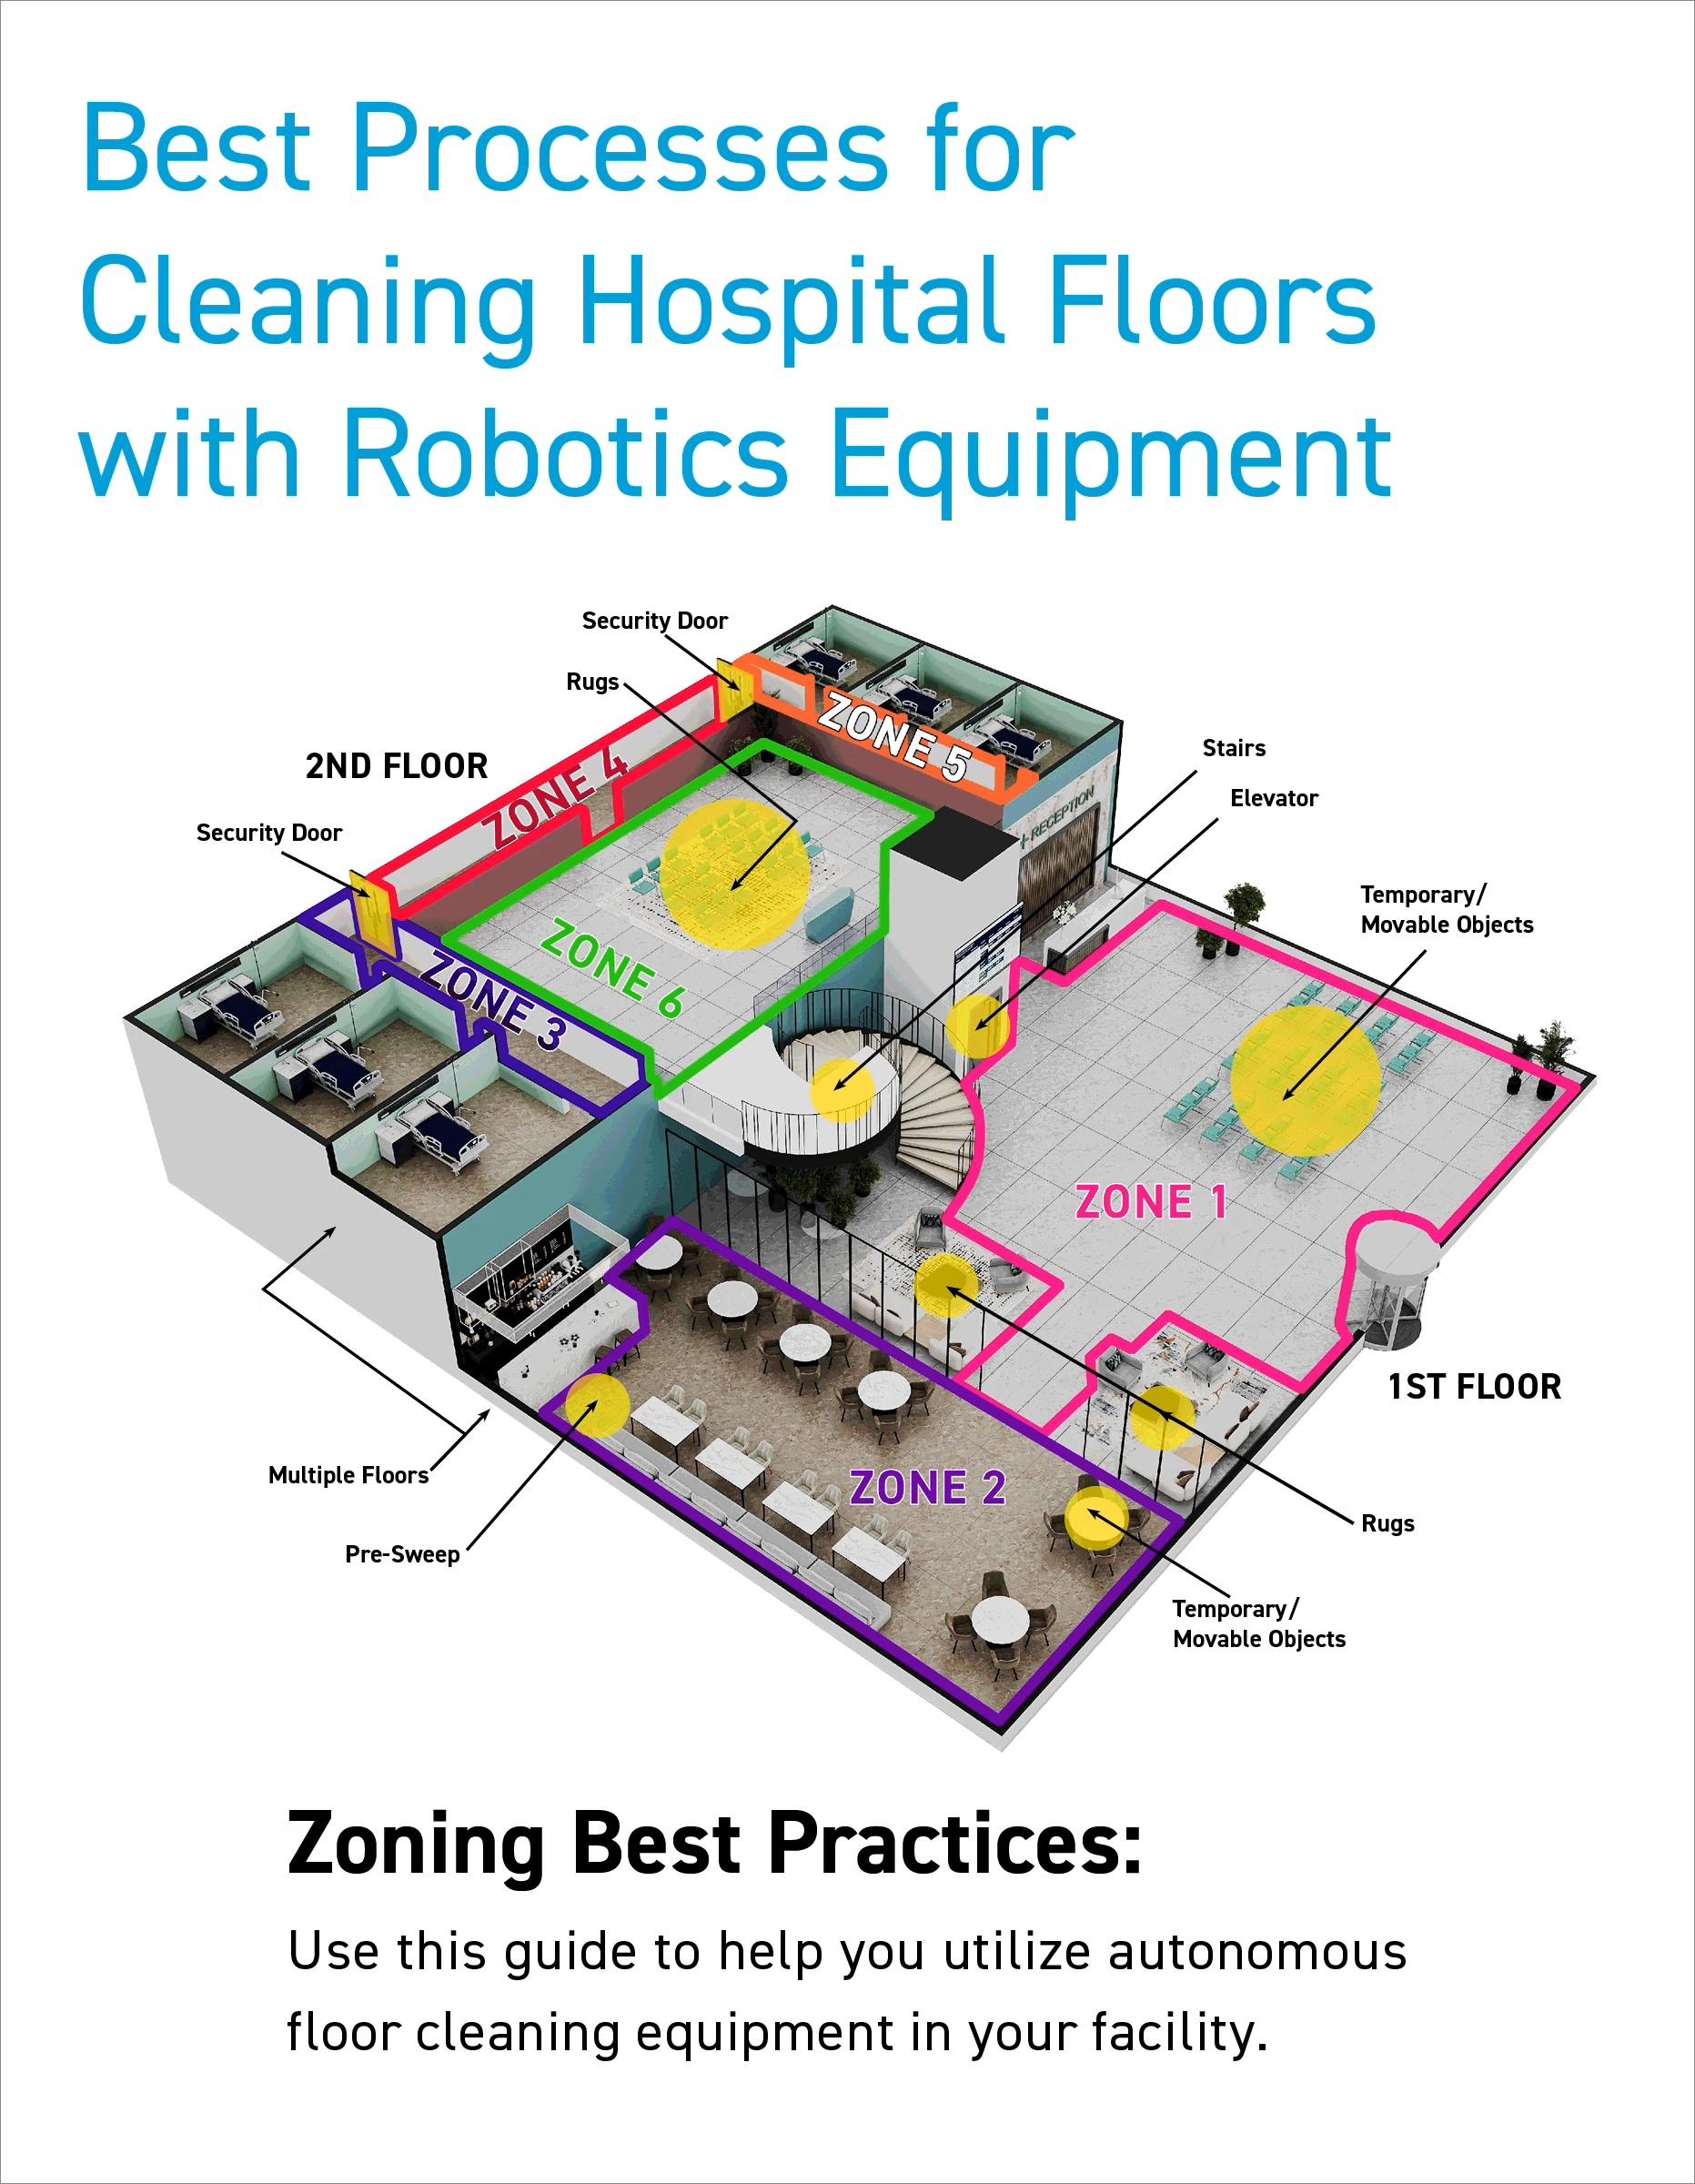 Best Processes for Cleaning Hospital Floors with Robotics Equipment